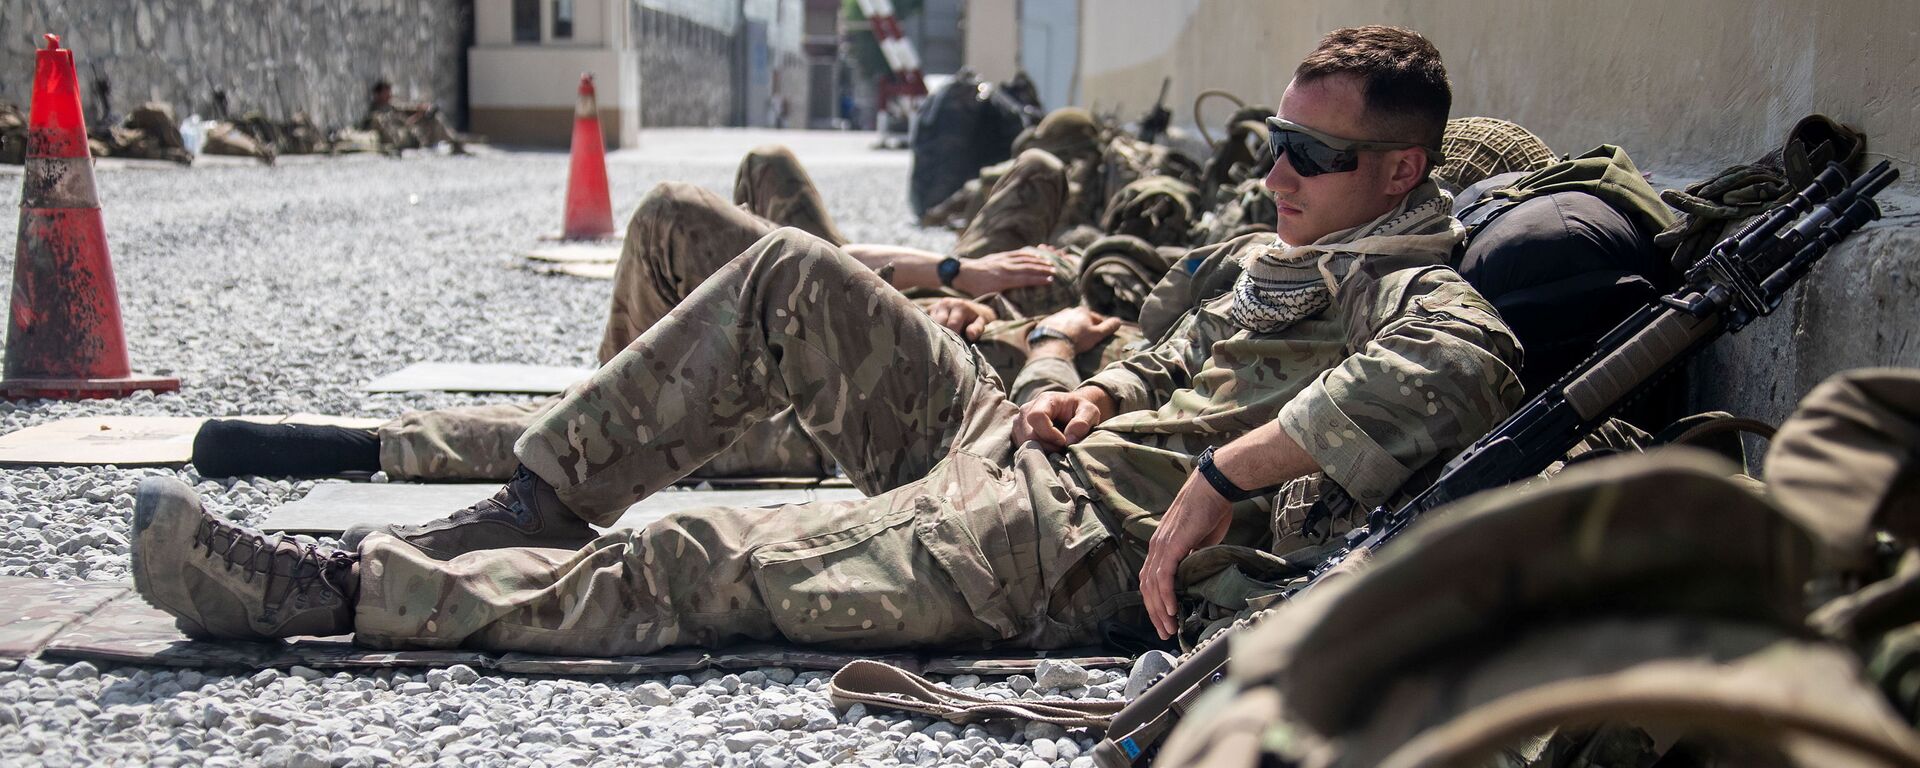 Members of the UK Armed Forces rest as they continue to take part in the evacuation of entitled personnel from Kabul airport, in Kabul, Afghanistan August 19-22, 2021, in this handout picture obtained by Reuters on August 23, 2021 - Sputnik International, 1920